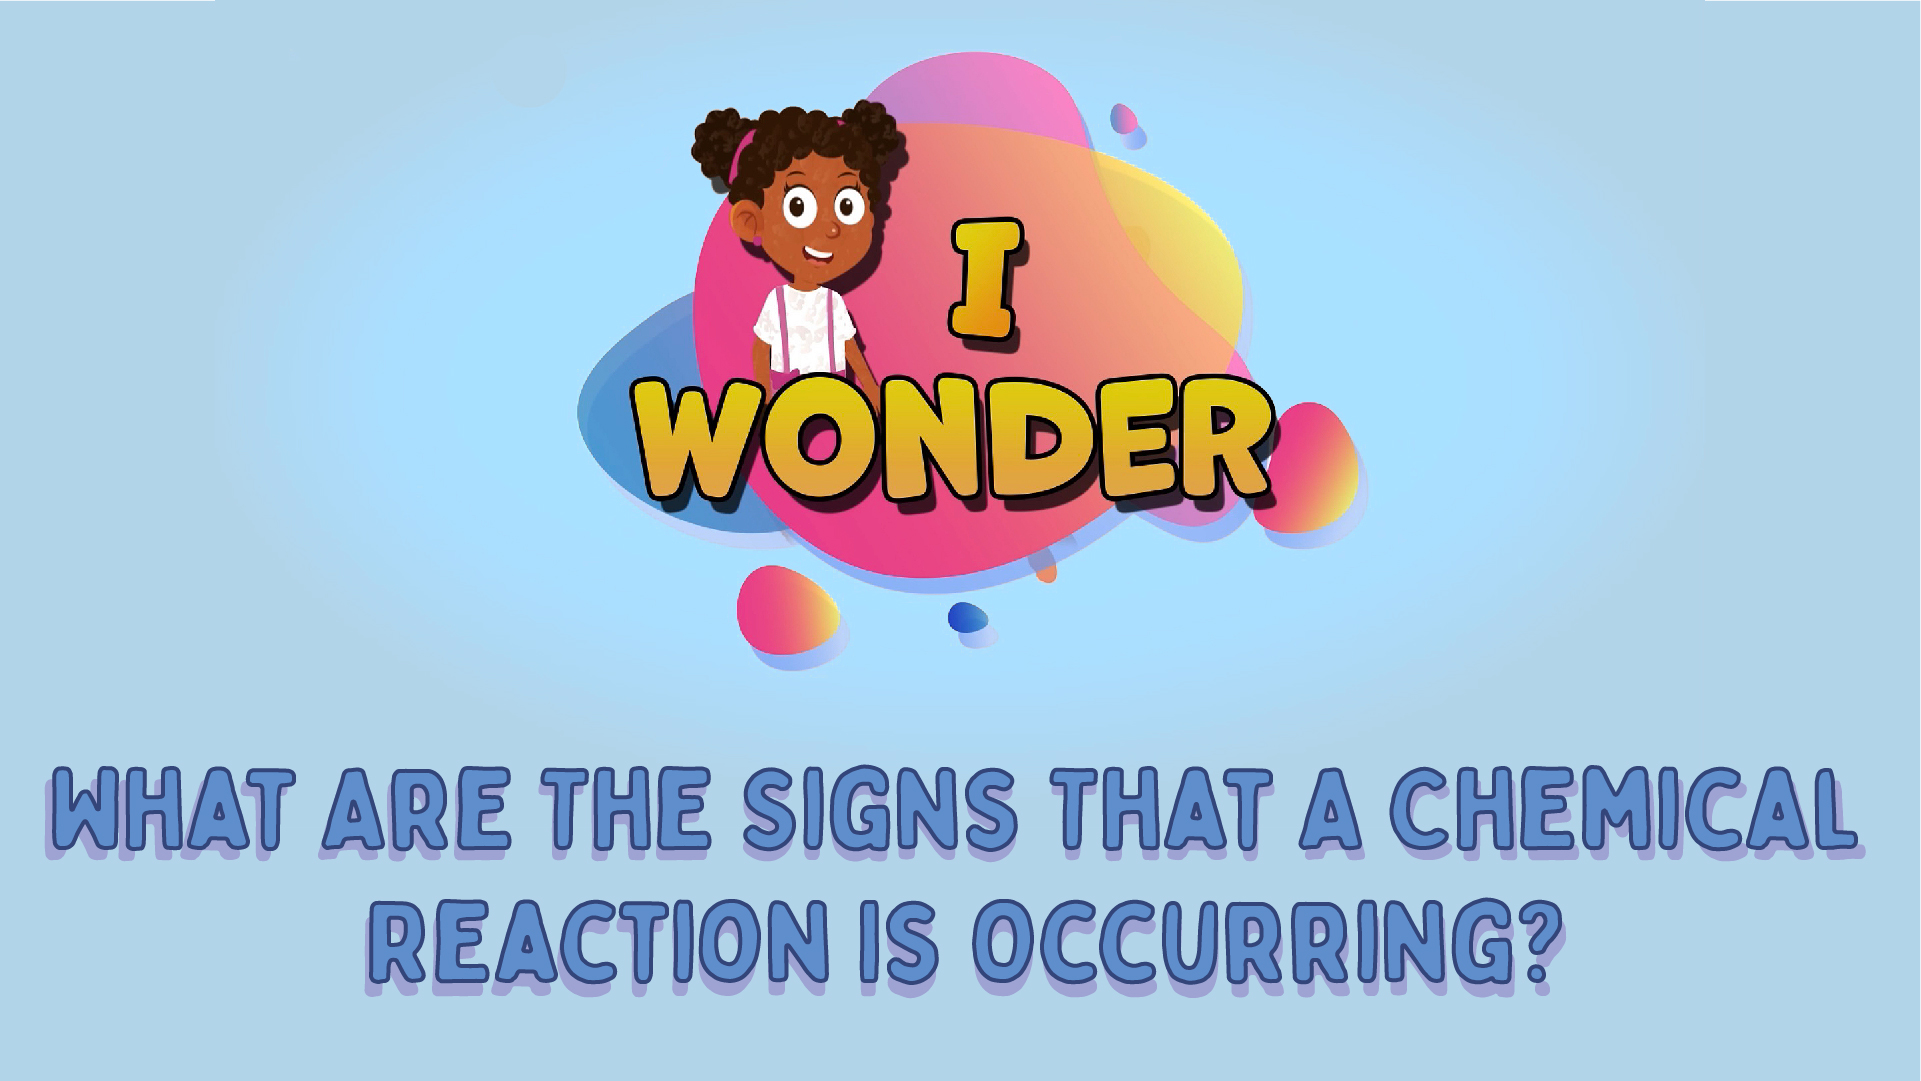 What Are The Signs That A Chemical Reaction Is Occurring?